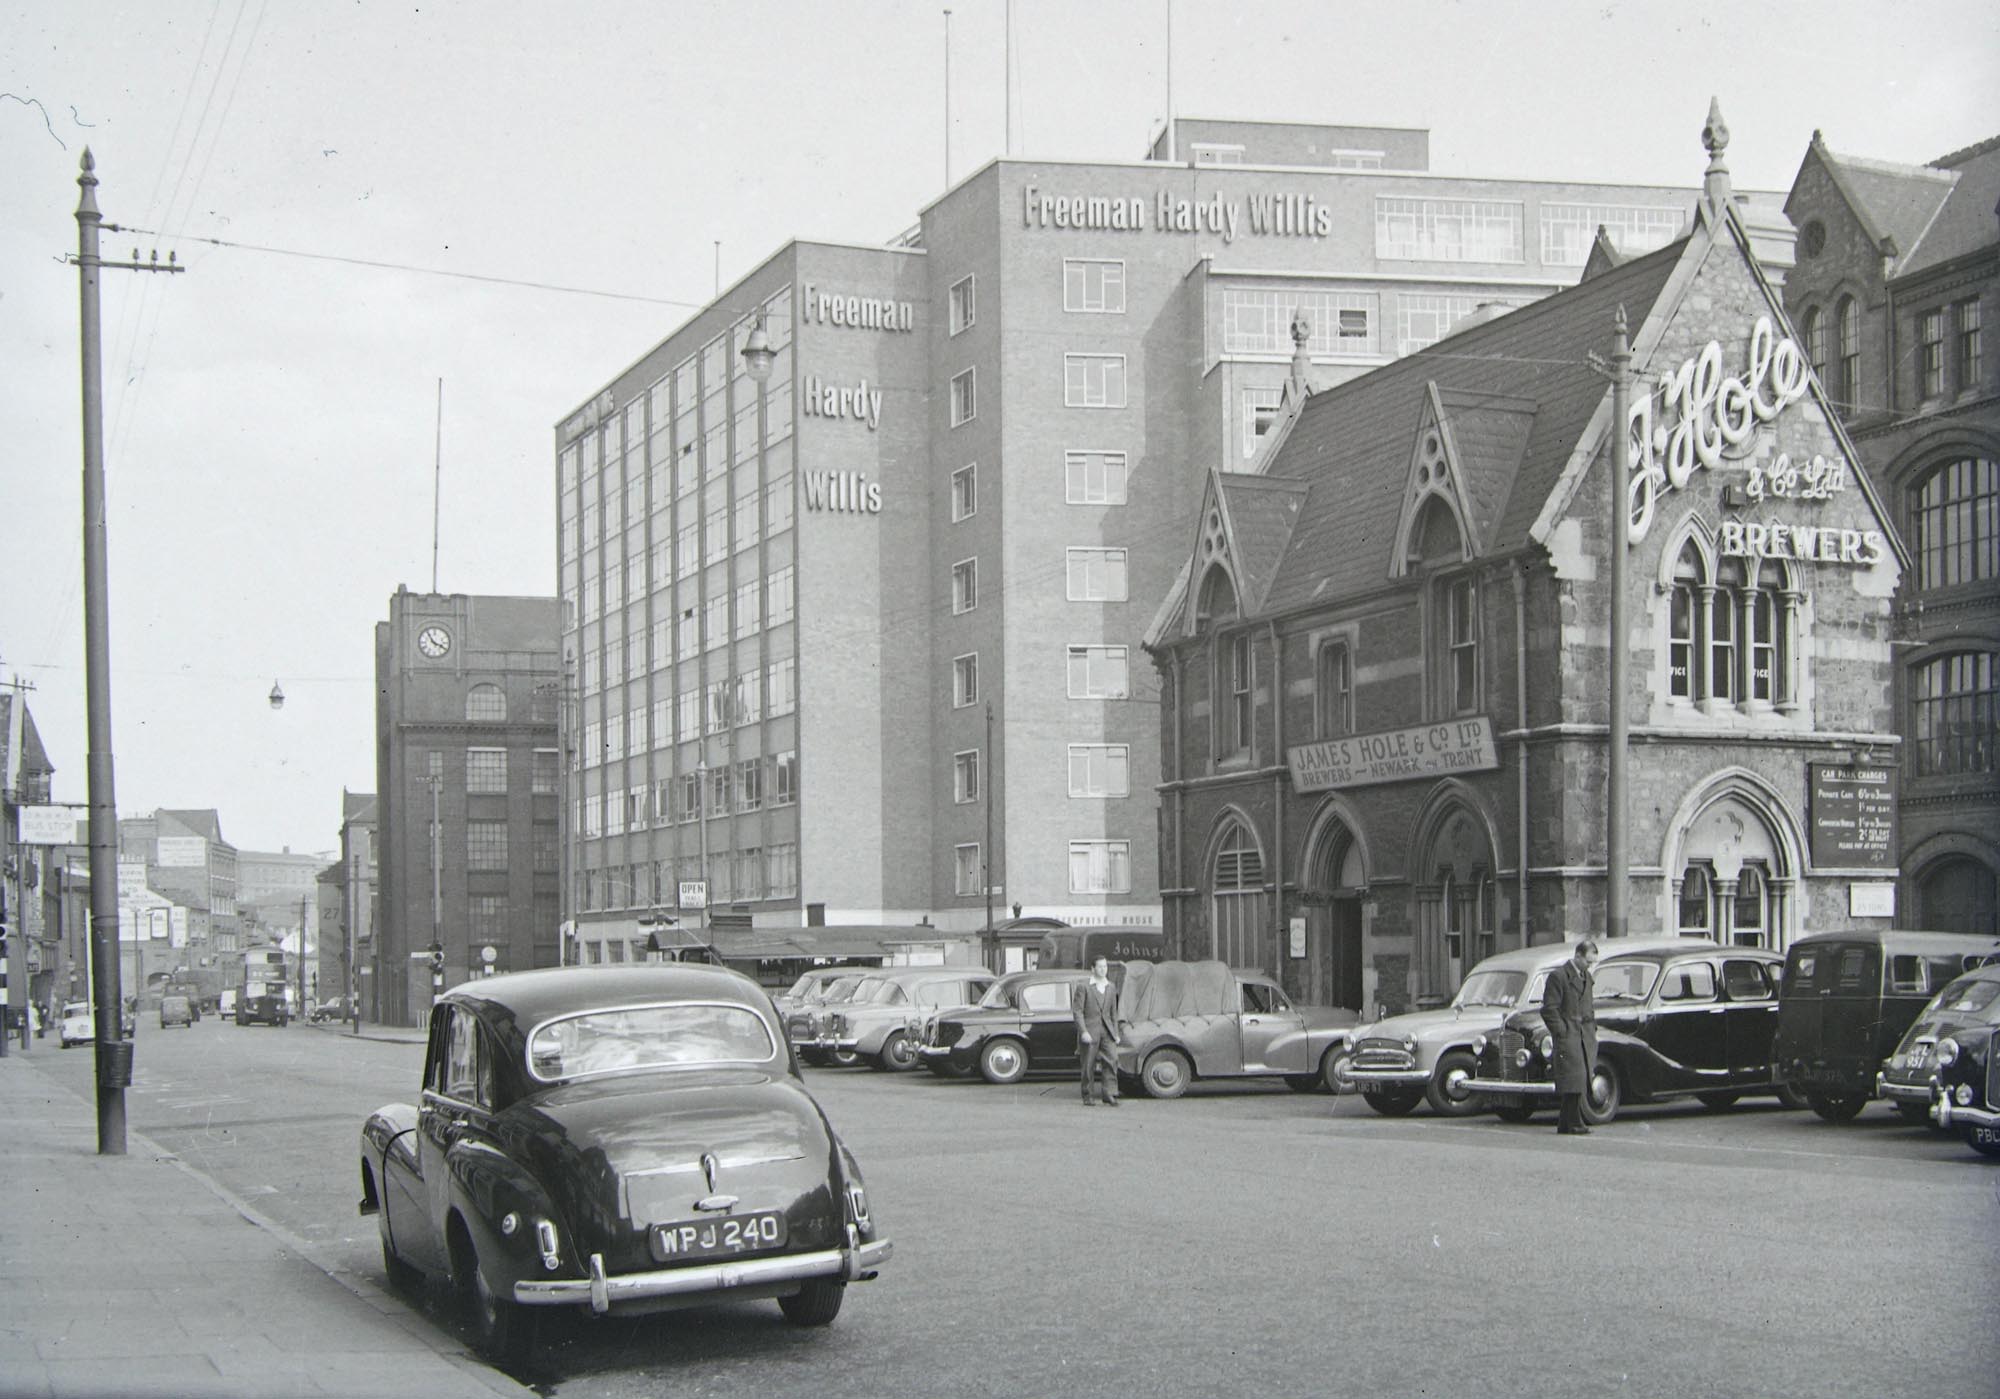 The area, circa early 1960s, showing the Freeman Hardy & Wills Factory in the background - Leicestershire Record Office